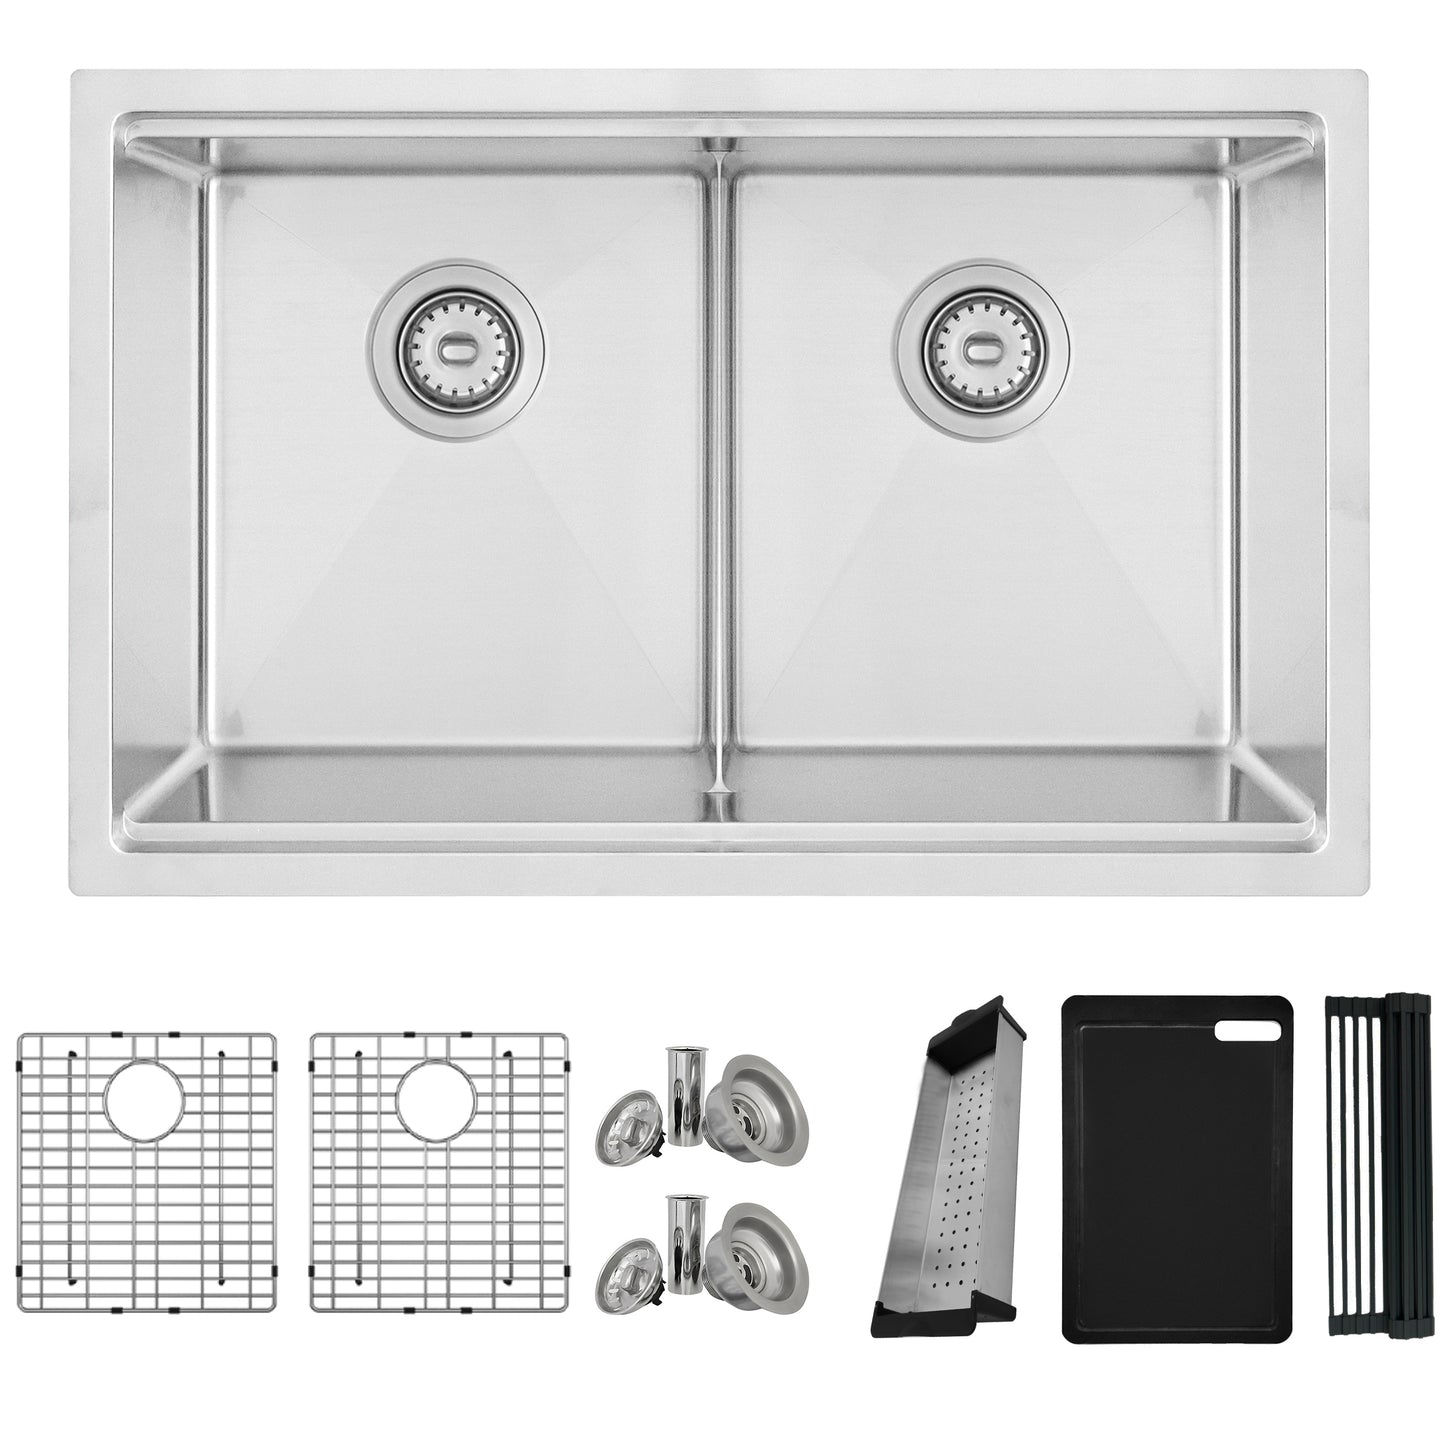 Stylish Boron 30 inch Workstation Double Bowl Undermount and Drop-in 16 Gauge Stainless Steel Kitchen Sink with Built in Accessories